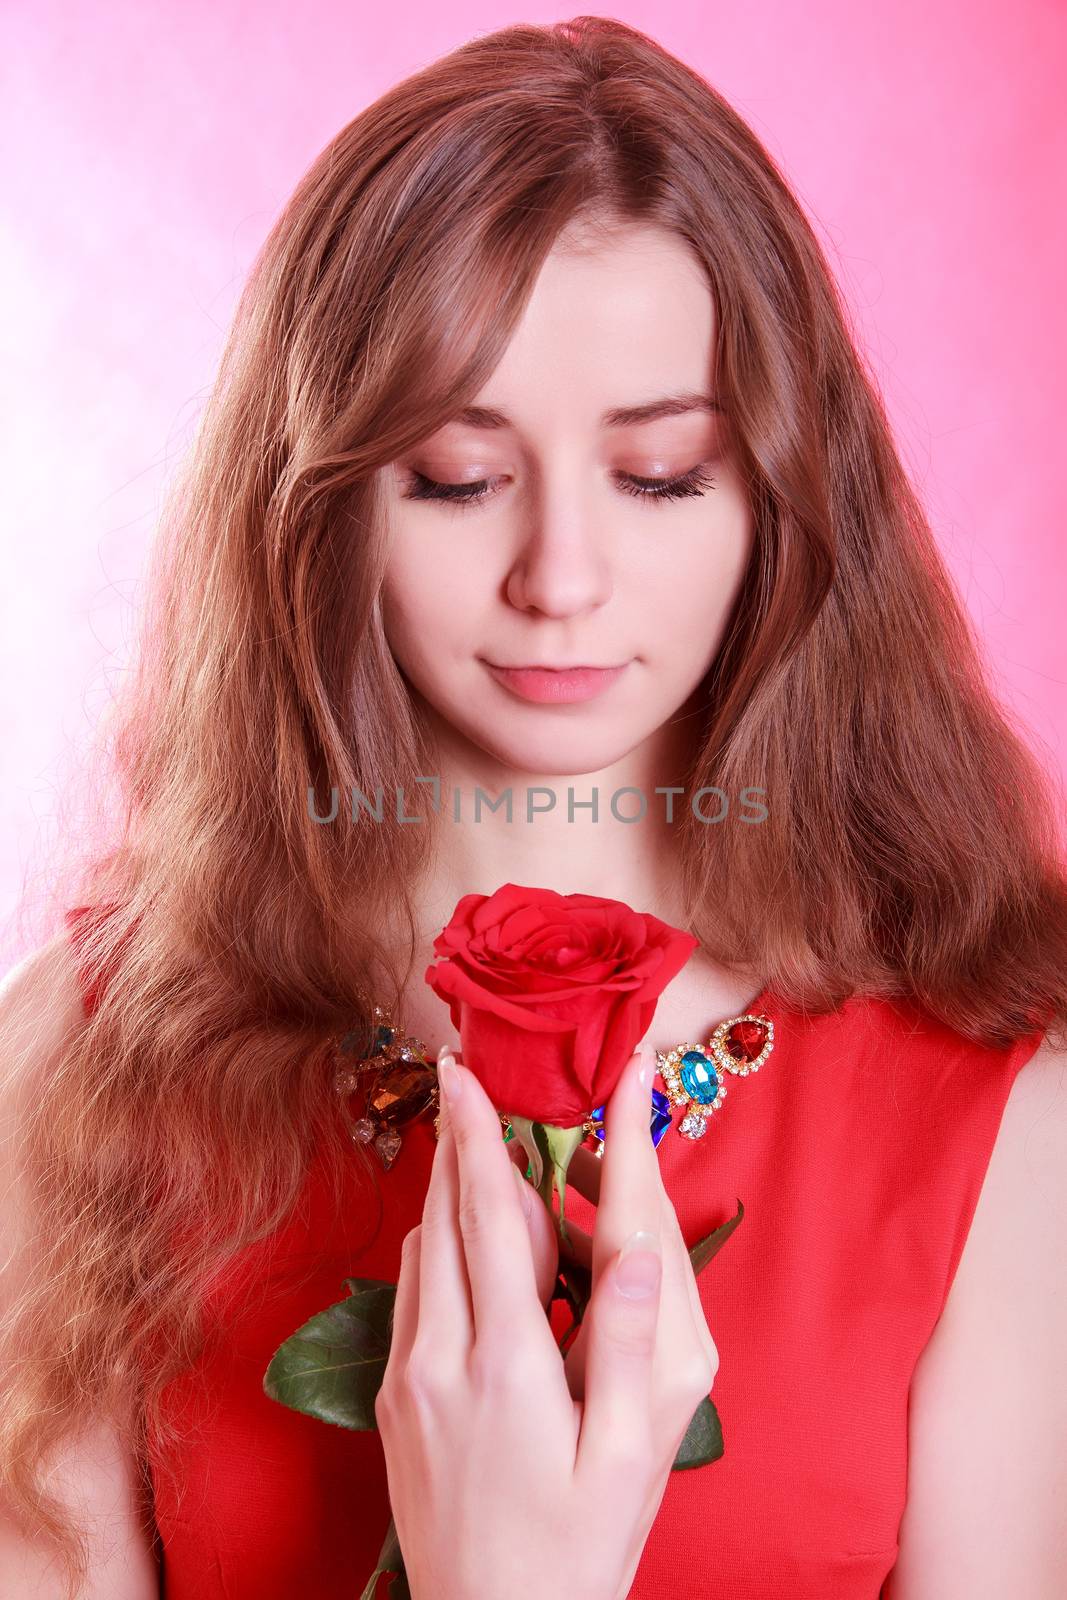 Portrait of a young attractive woman with a red rose over pink background